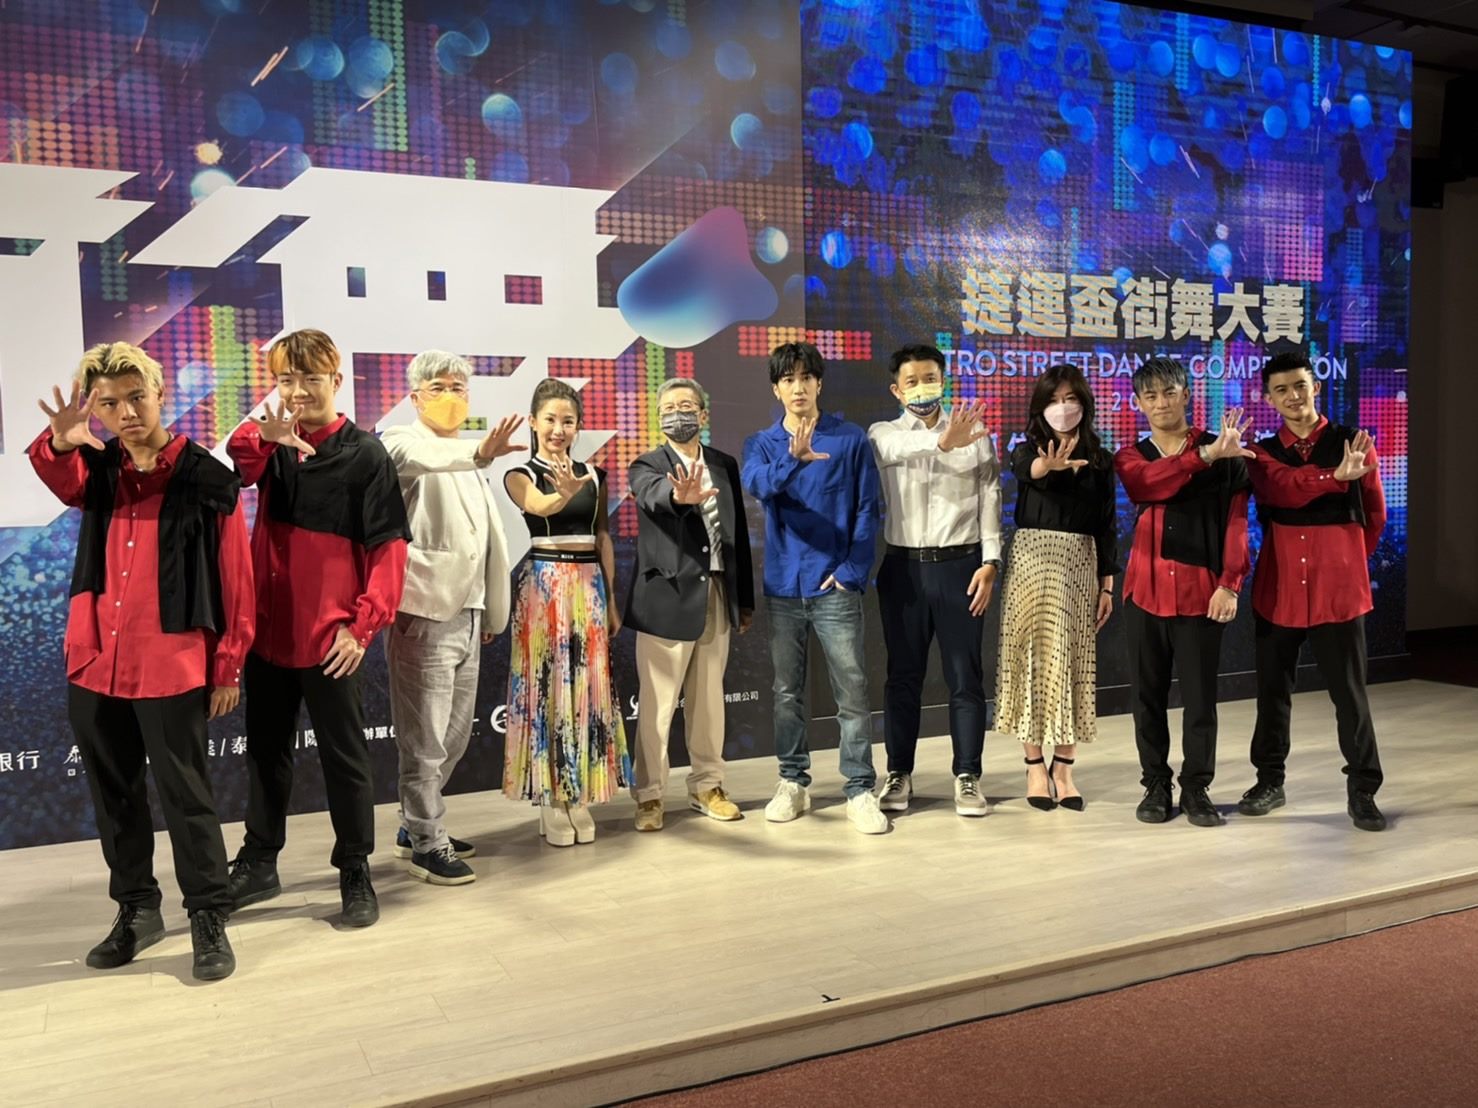 Spokespeople B.T.O.D, Shu-Yao Kuo, and Shou Lou encourage dancers to bravely chase their dreams